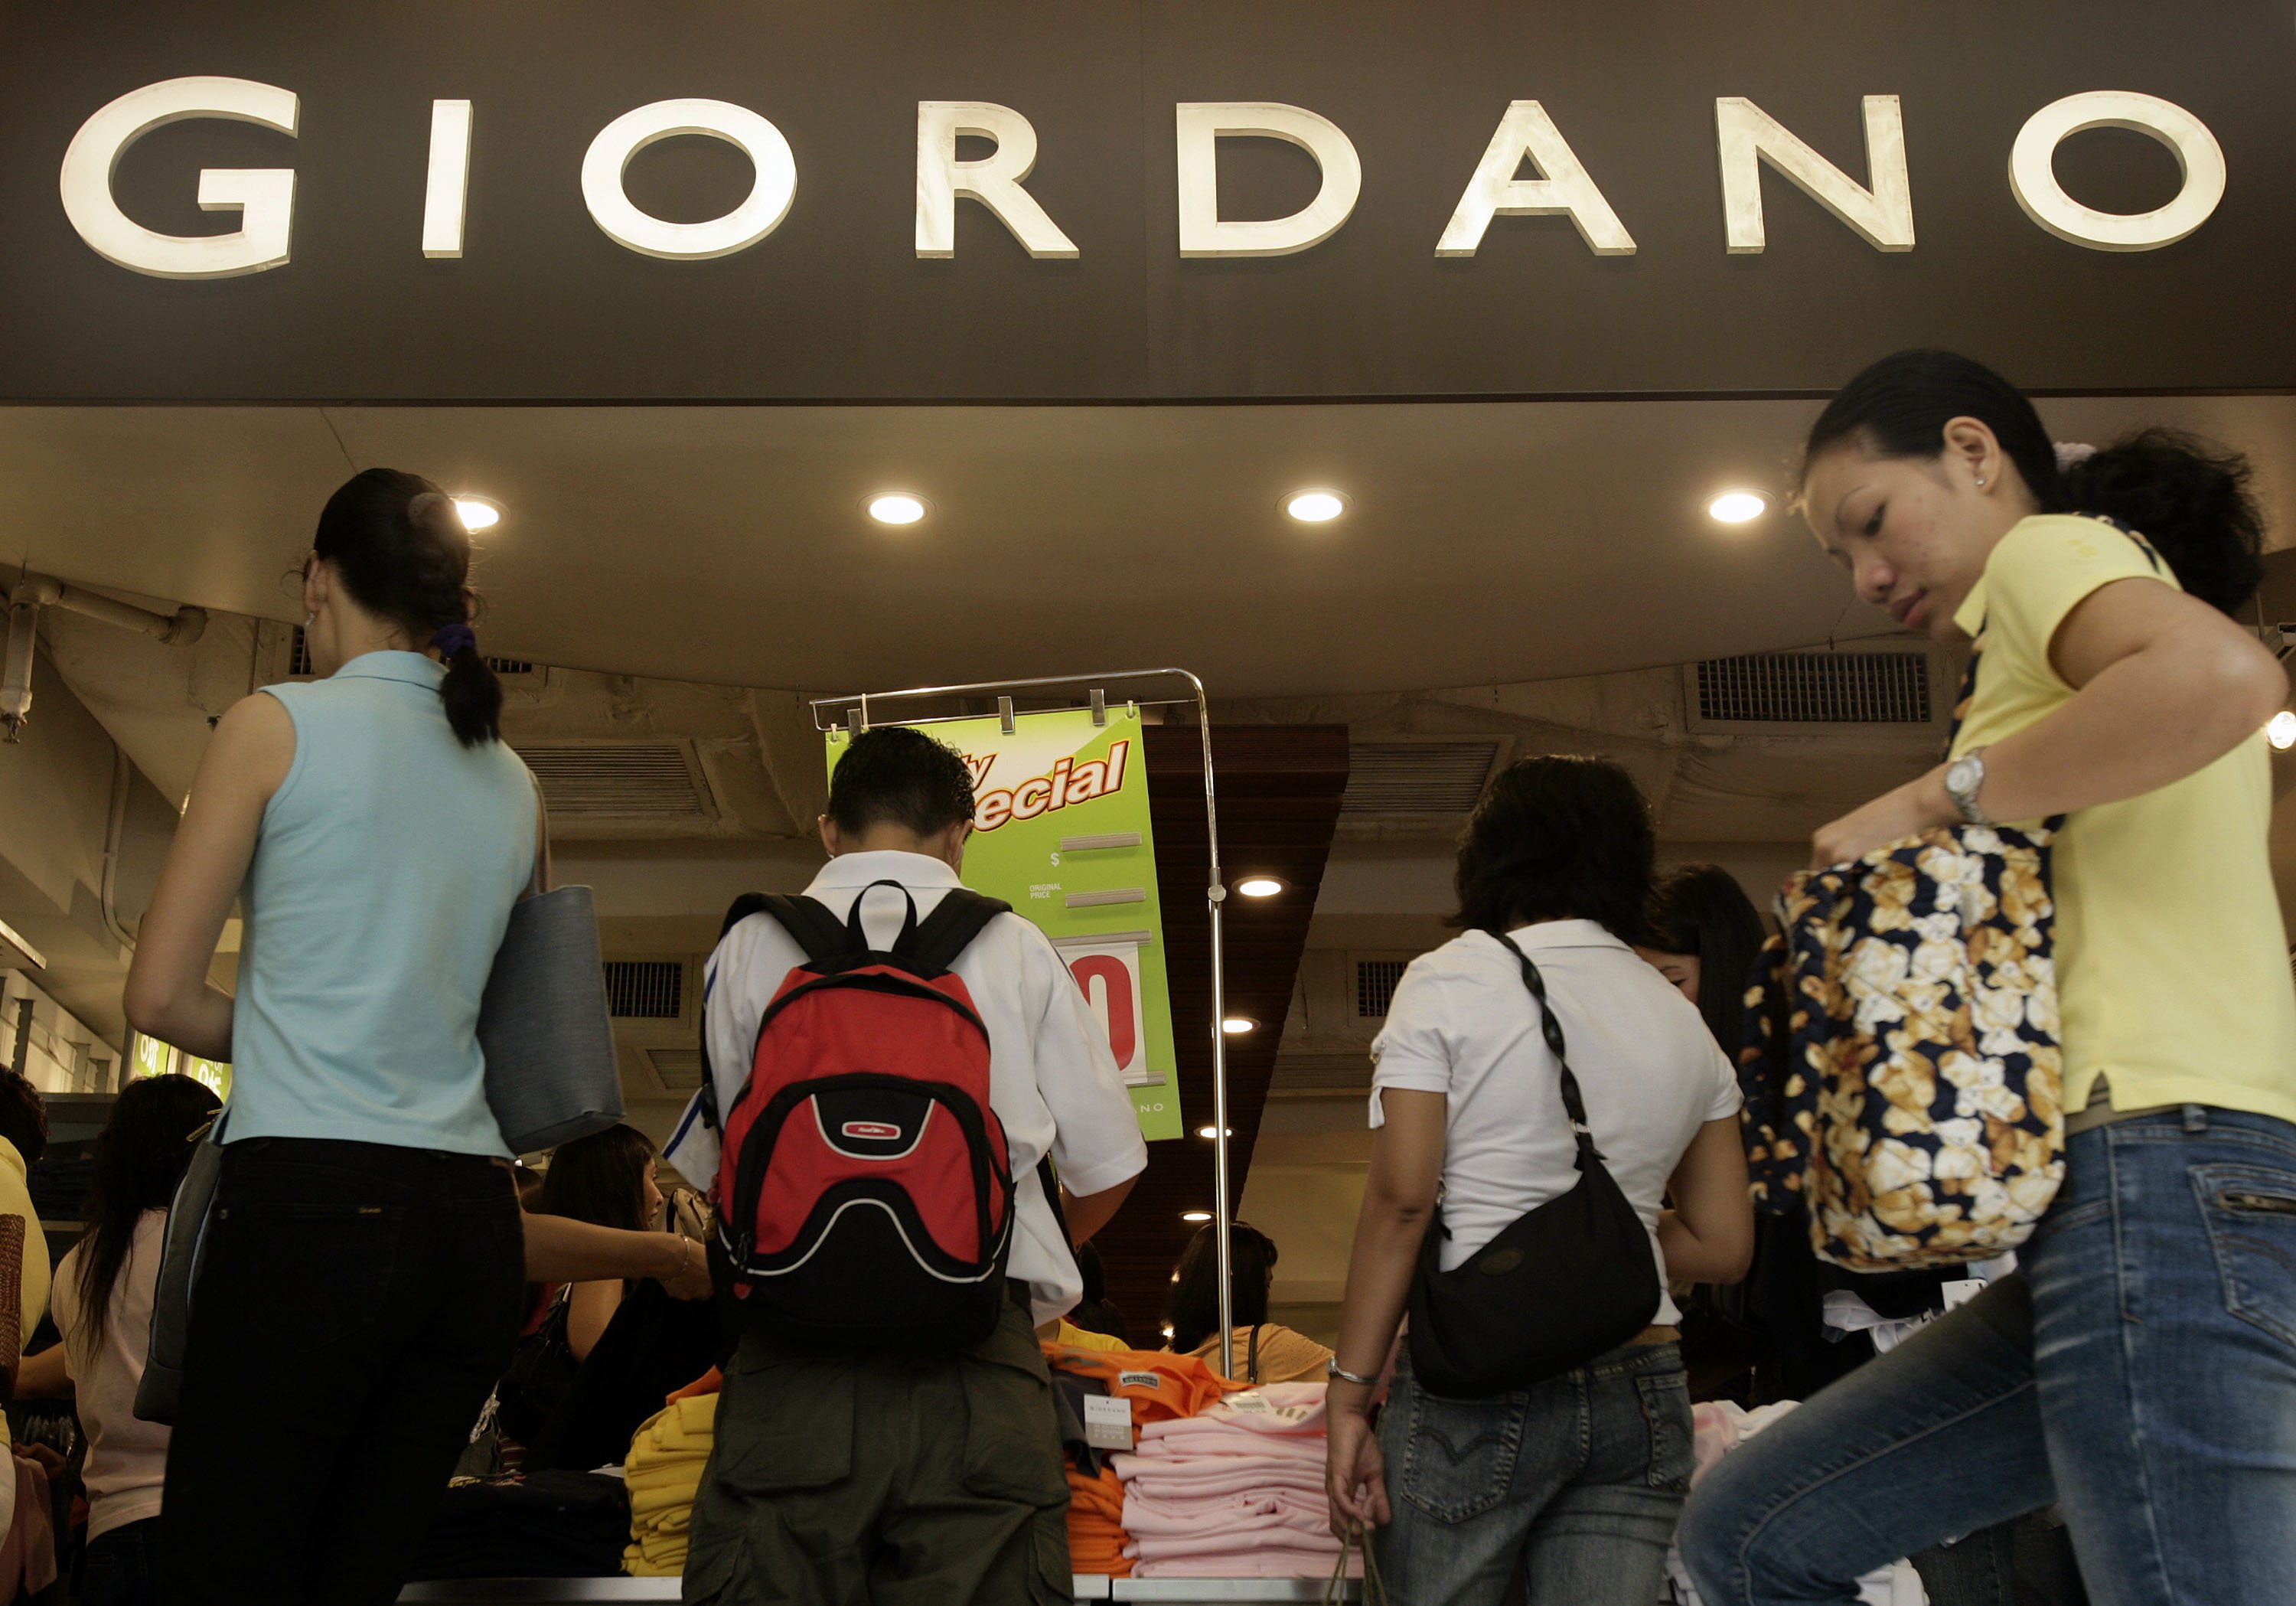 Shoppers throng a Giordano store in Hong Kong. Photo: Bloomberg